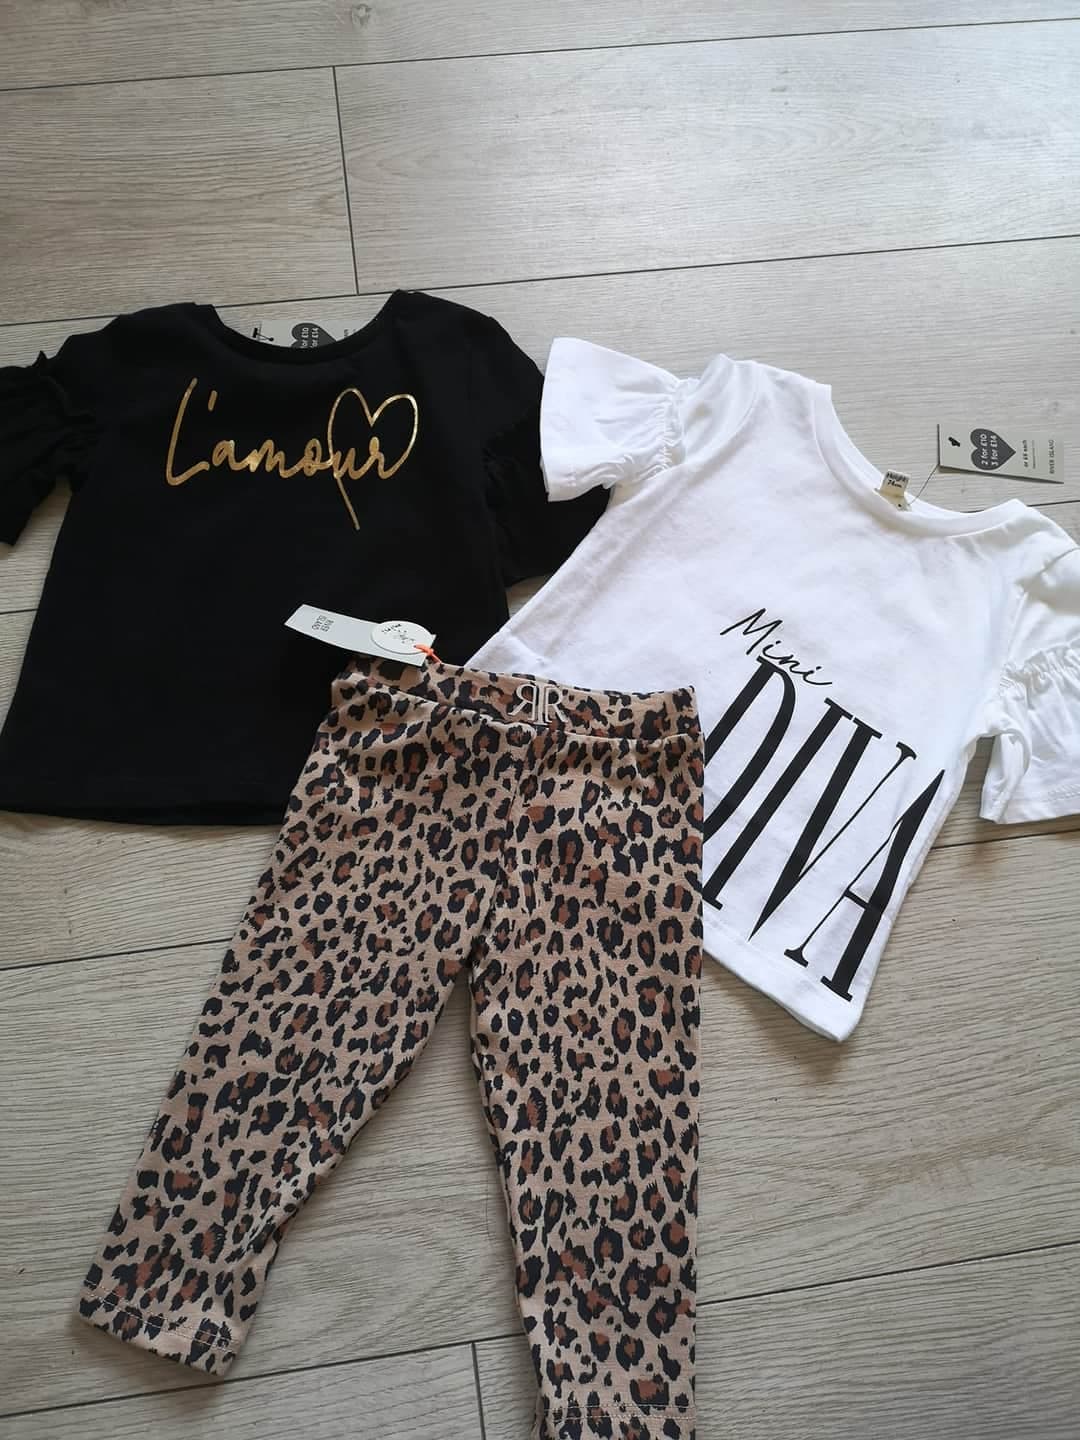 Baby clothes from River Island